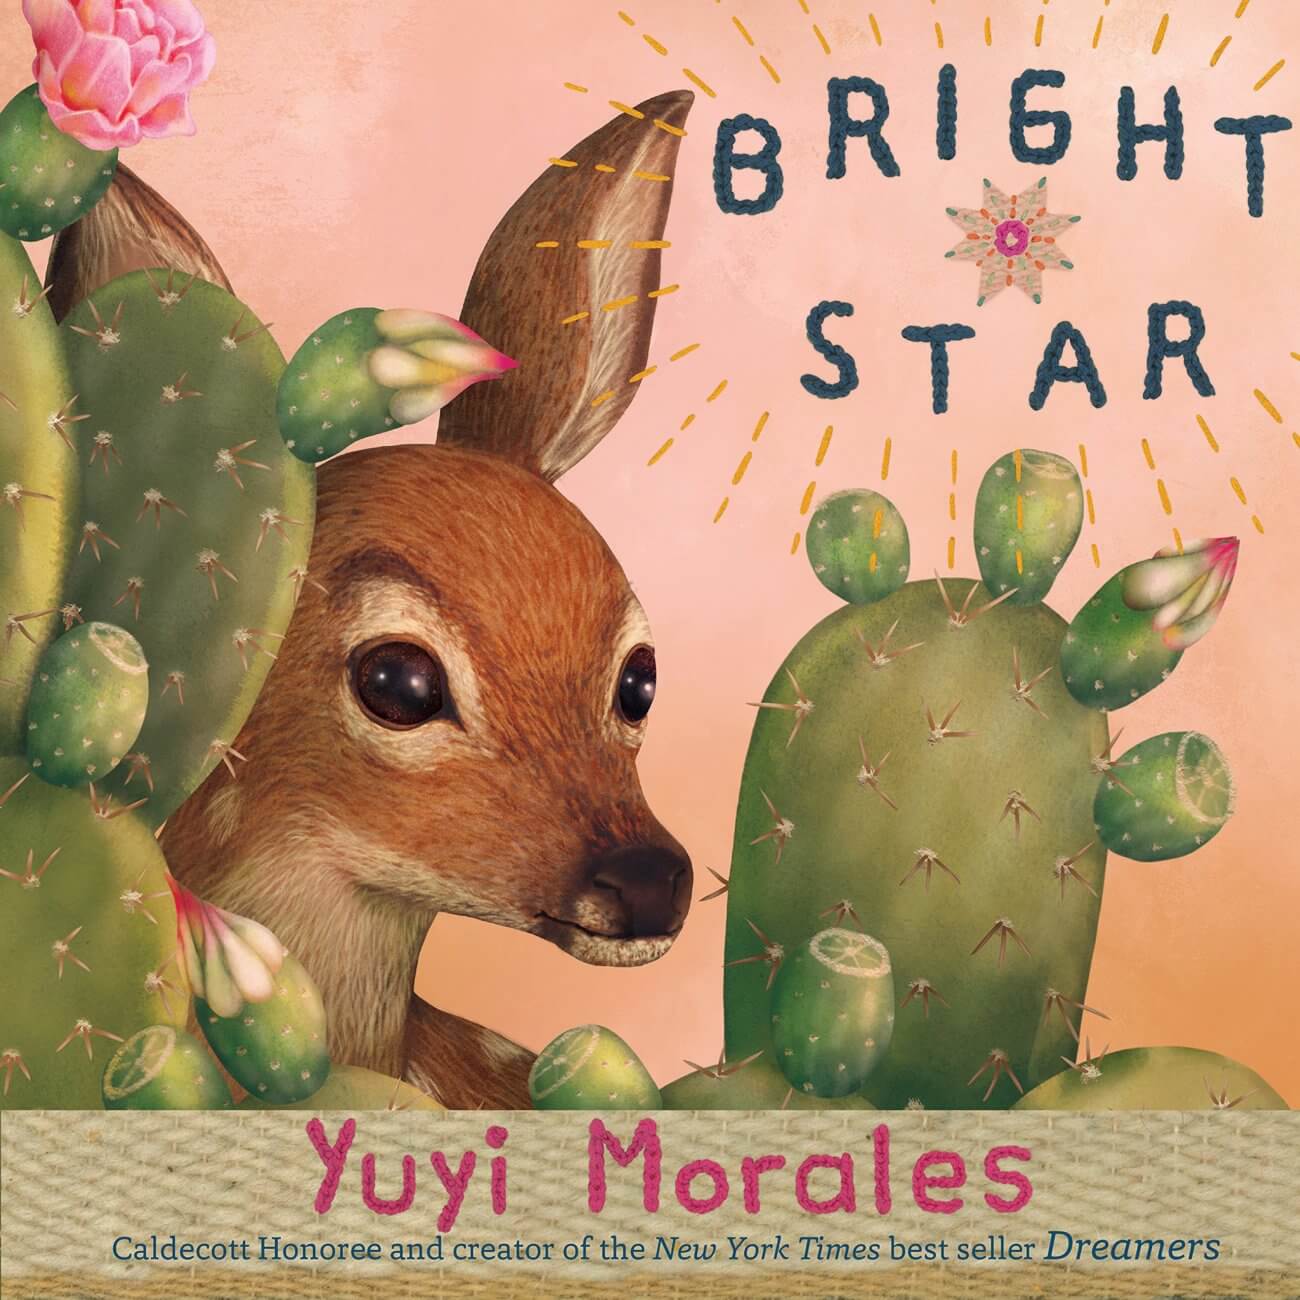 Cover of the book BRIGHT STAR by Yuyi Morales, featuring a fawn hiding among cacti.